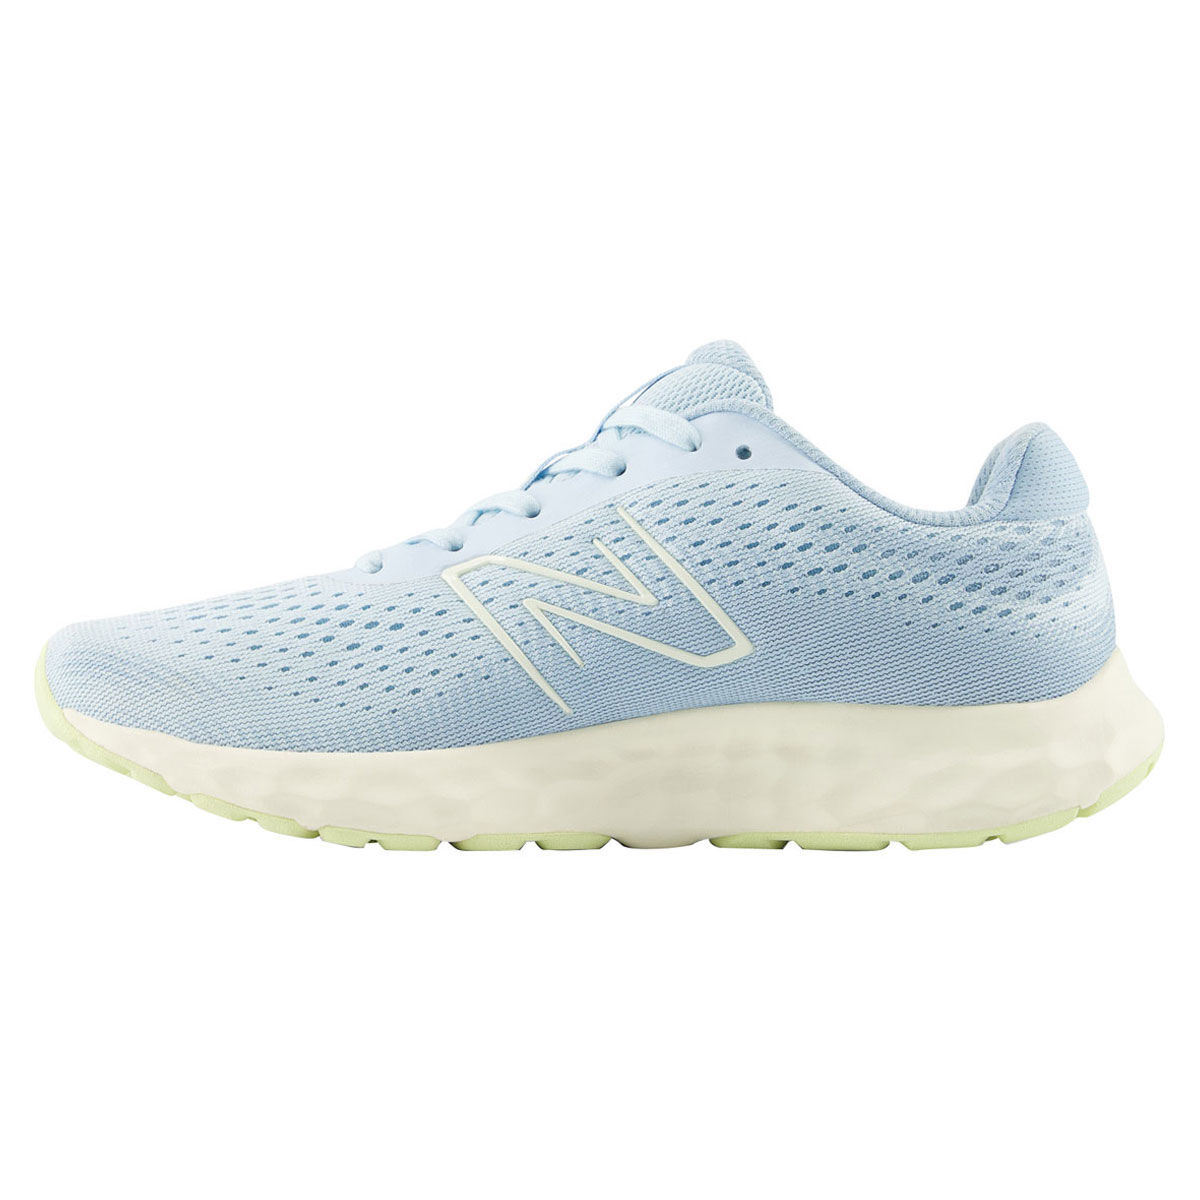 New Balance, Shoes, Clothing & Accessories